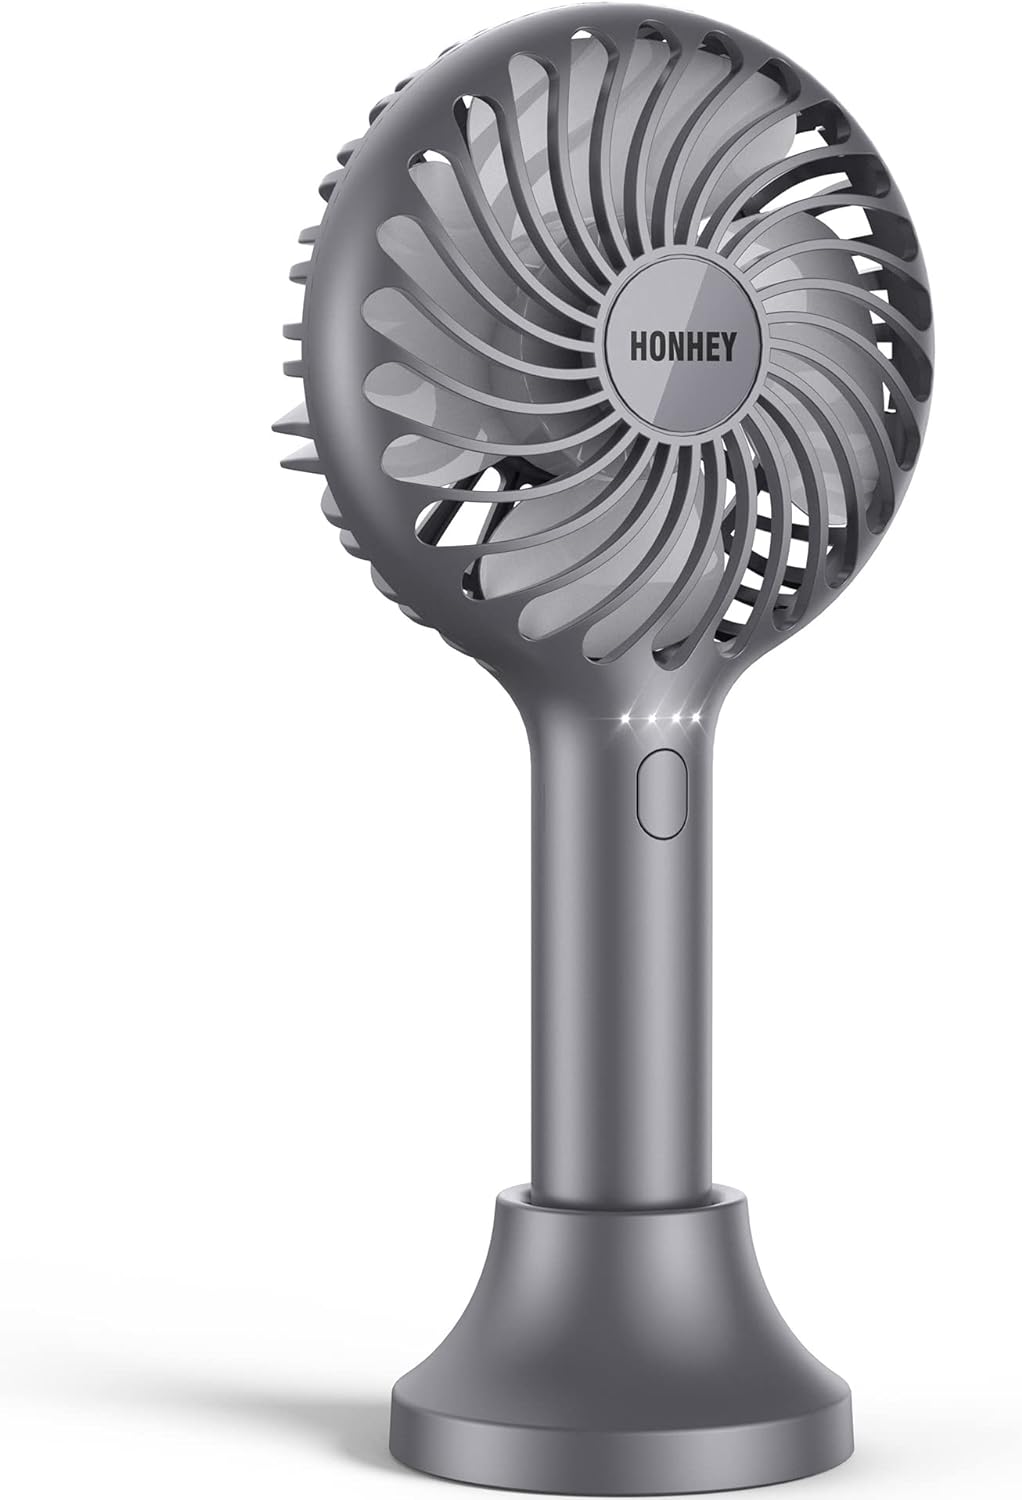 HonHey Handheld Fan, 5000 mAh Portable Fan[8-25H Working Time] with Rechargeable Battery, 4 Speed Personal Cooling Desk Fan with Power Bank, Mini Hand Held Operated Makeup Fan for Women Outdoor